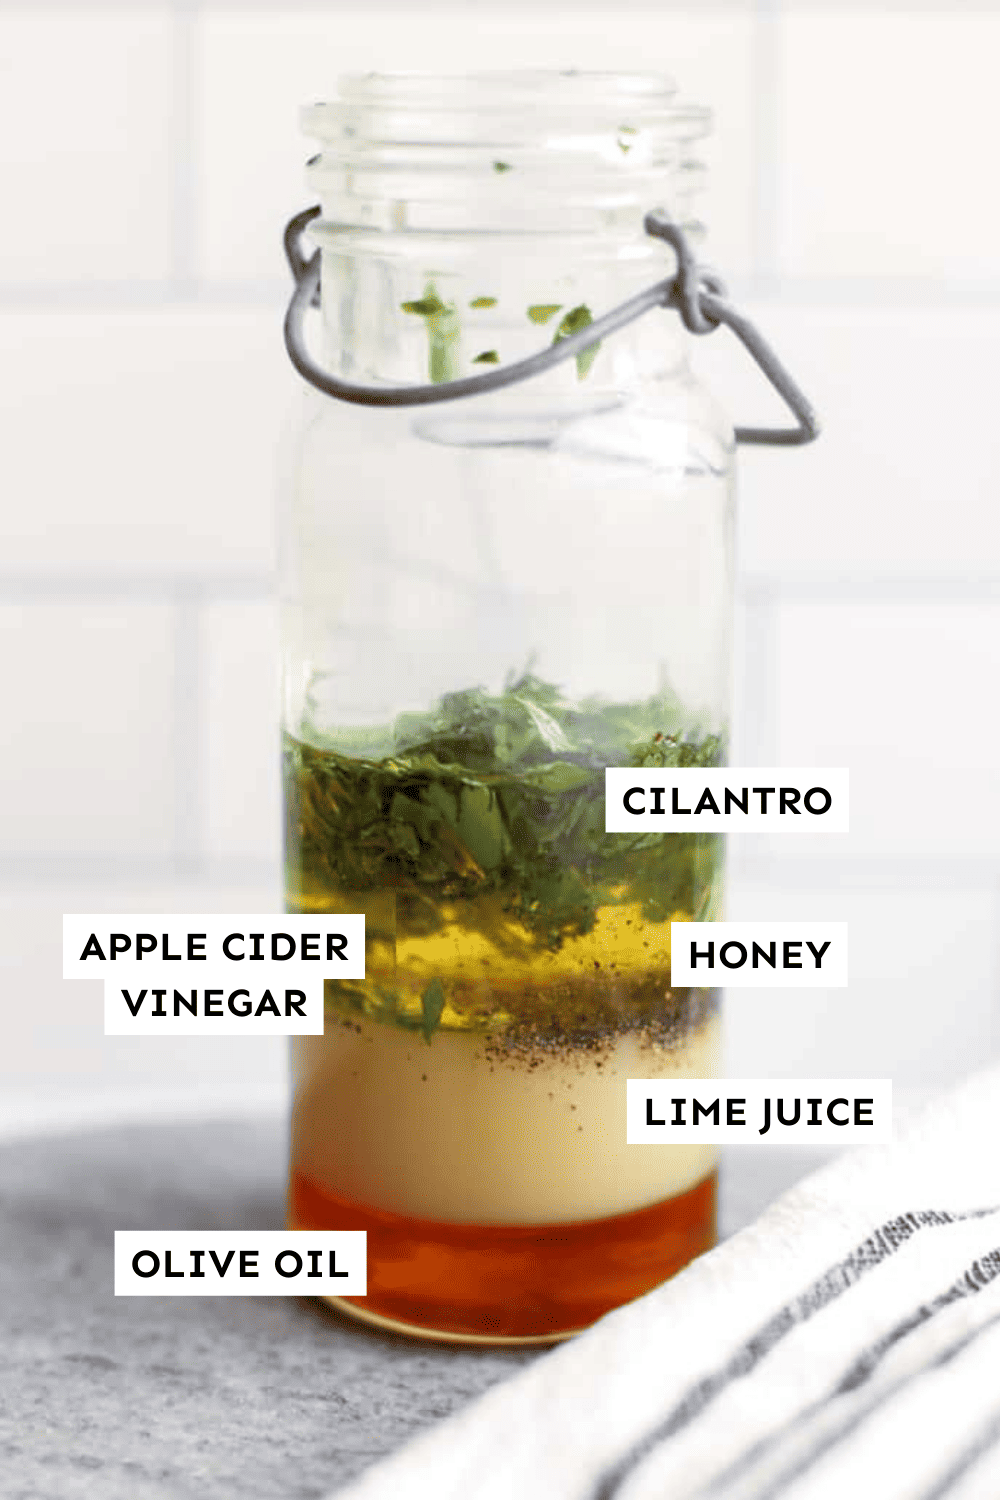 Cilantro lime vinaigrette ingredients layered in a glass bottle and labeled.